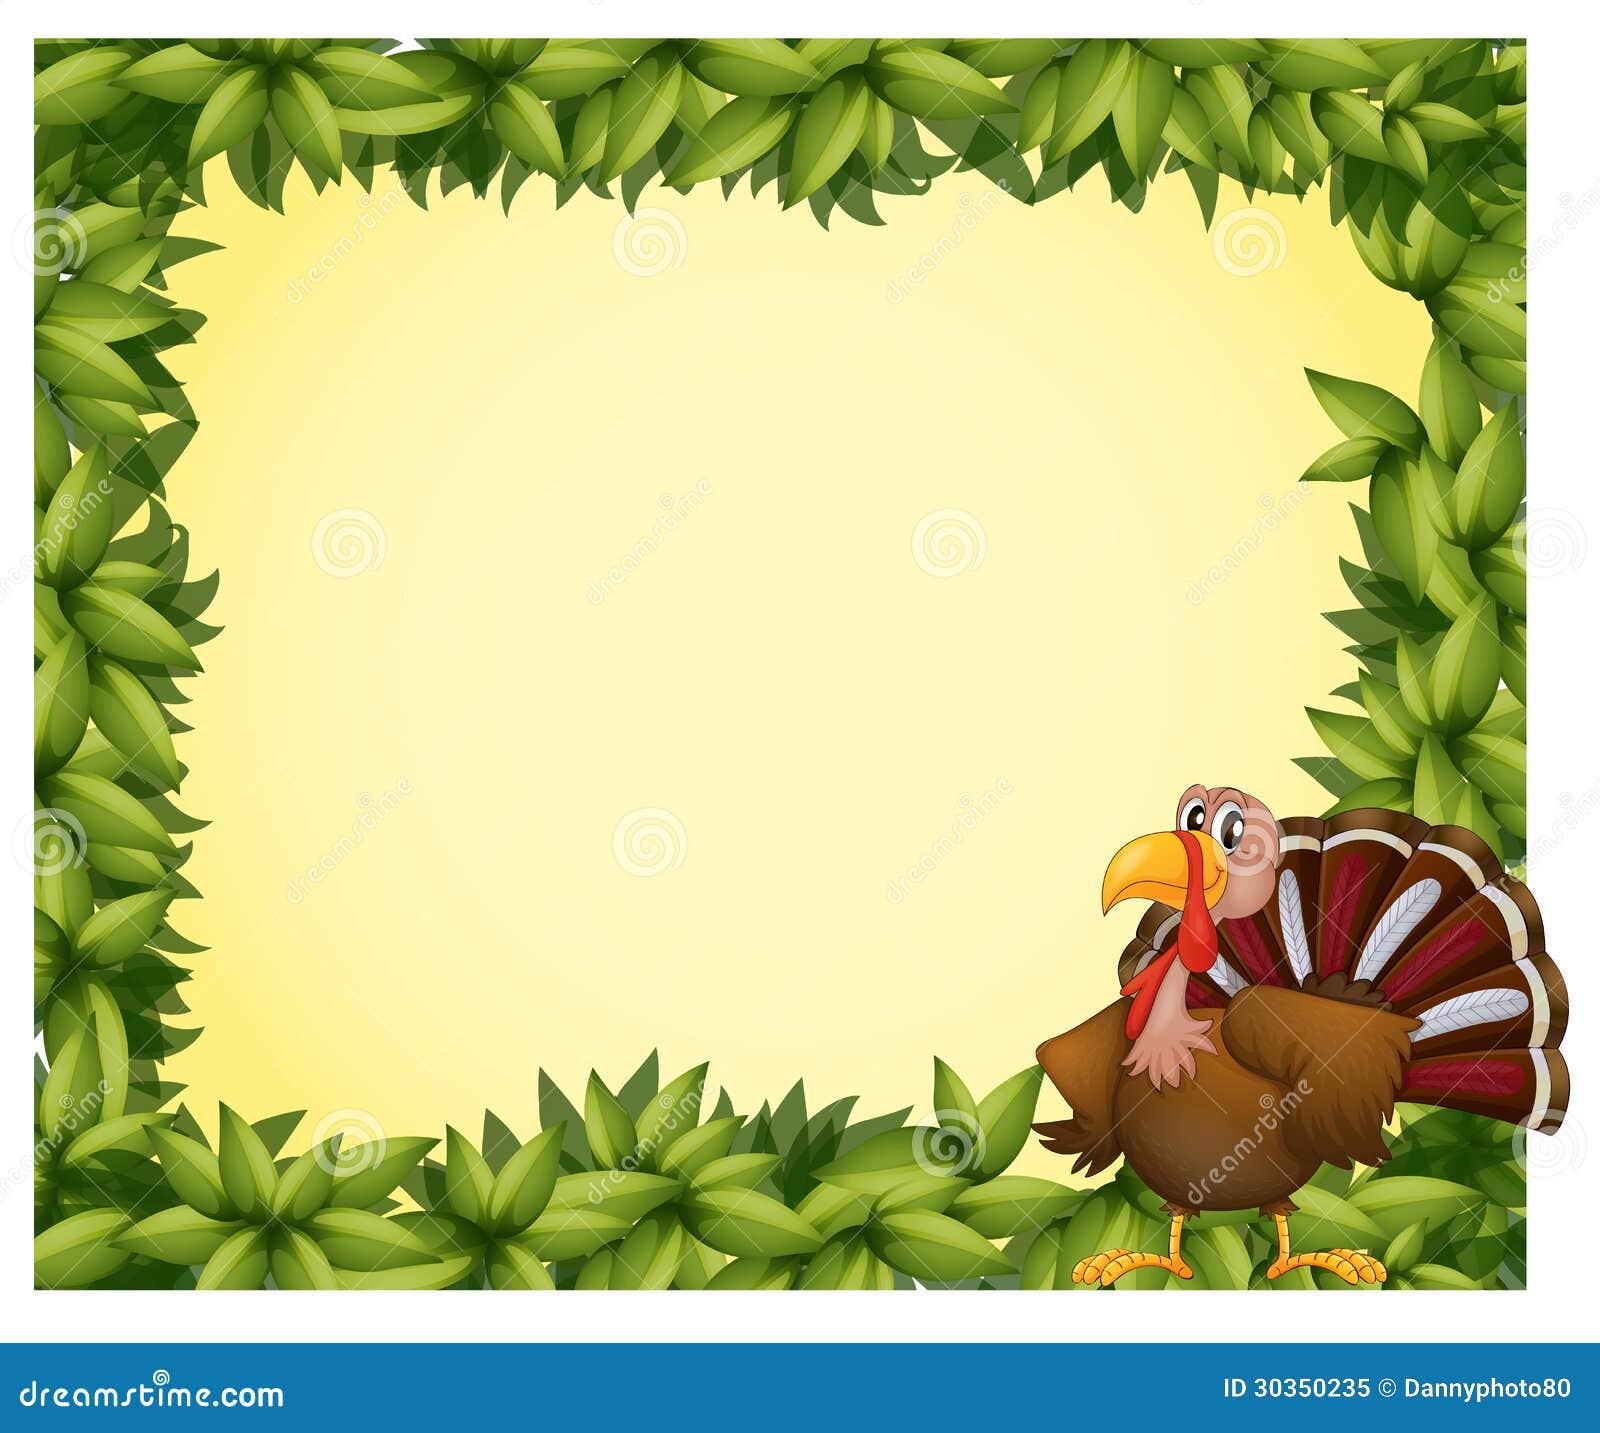 A Green Border With A Turkey Stock Vector - Illustration of background